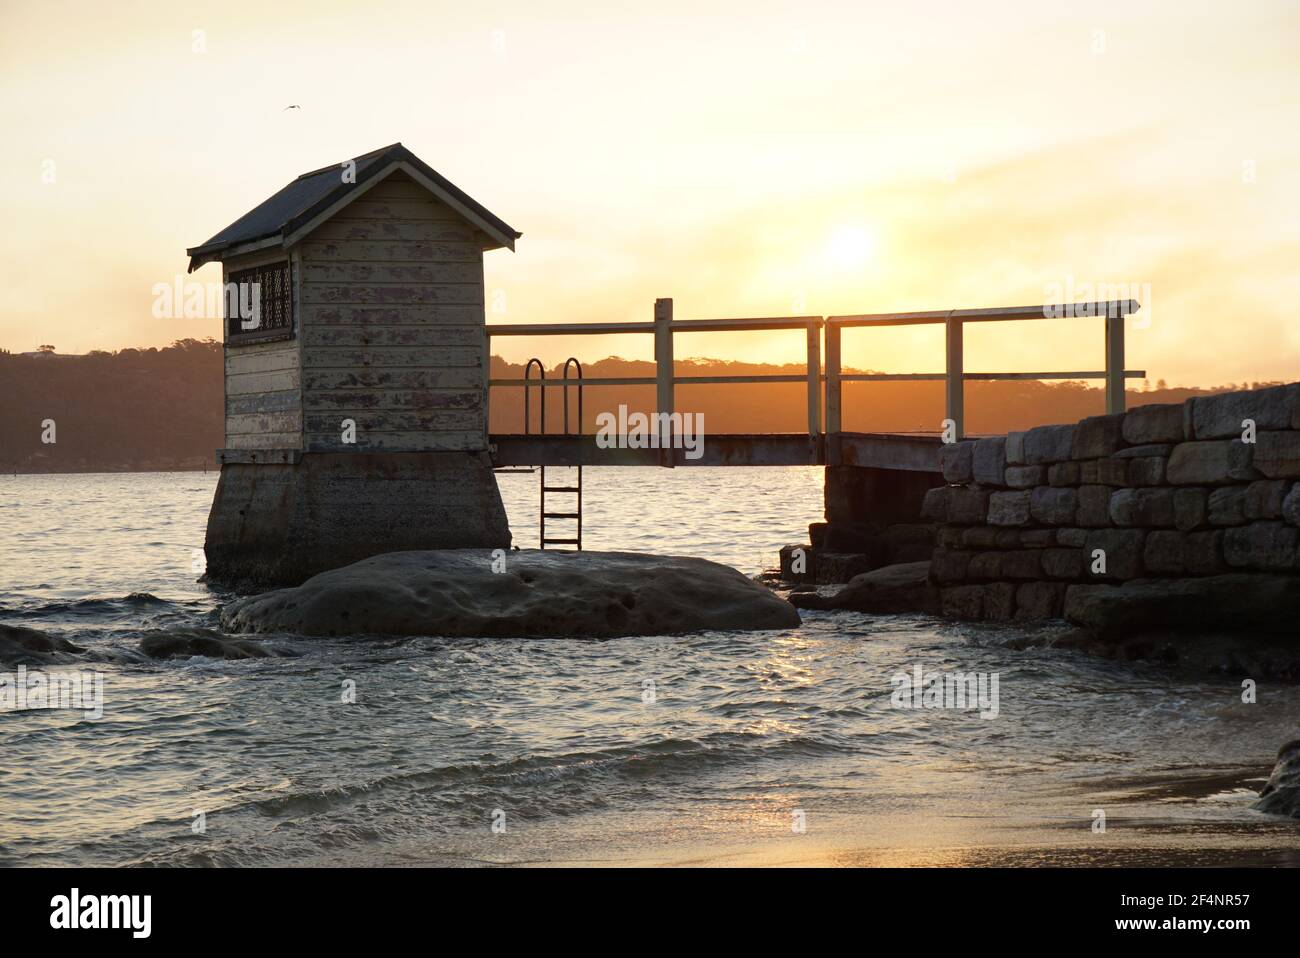 Watsons Bay, Sydney, NSW Australia - Sunset behind a small hut and bridge in Camp cove beach Stock Photo